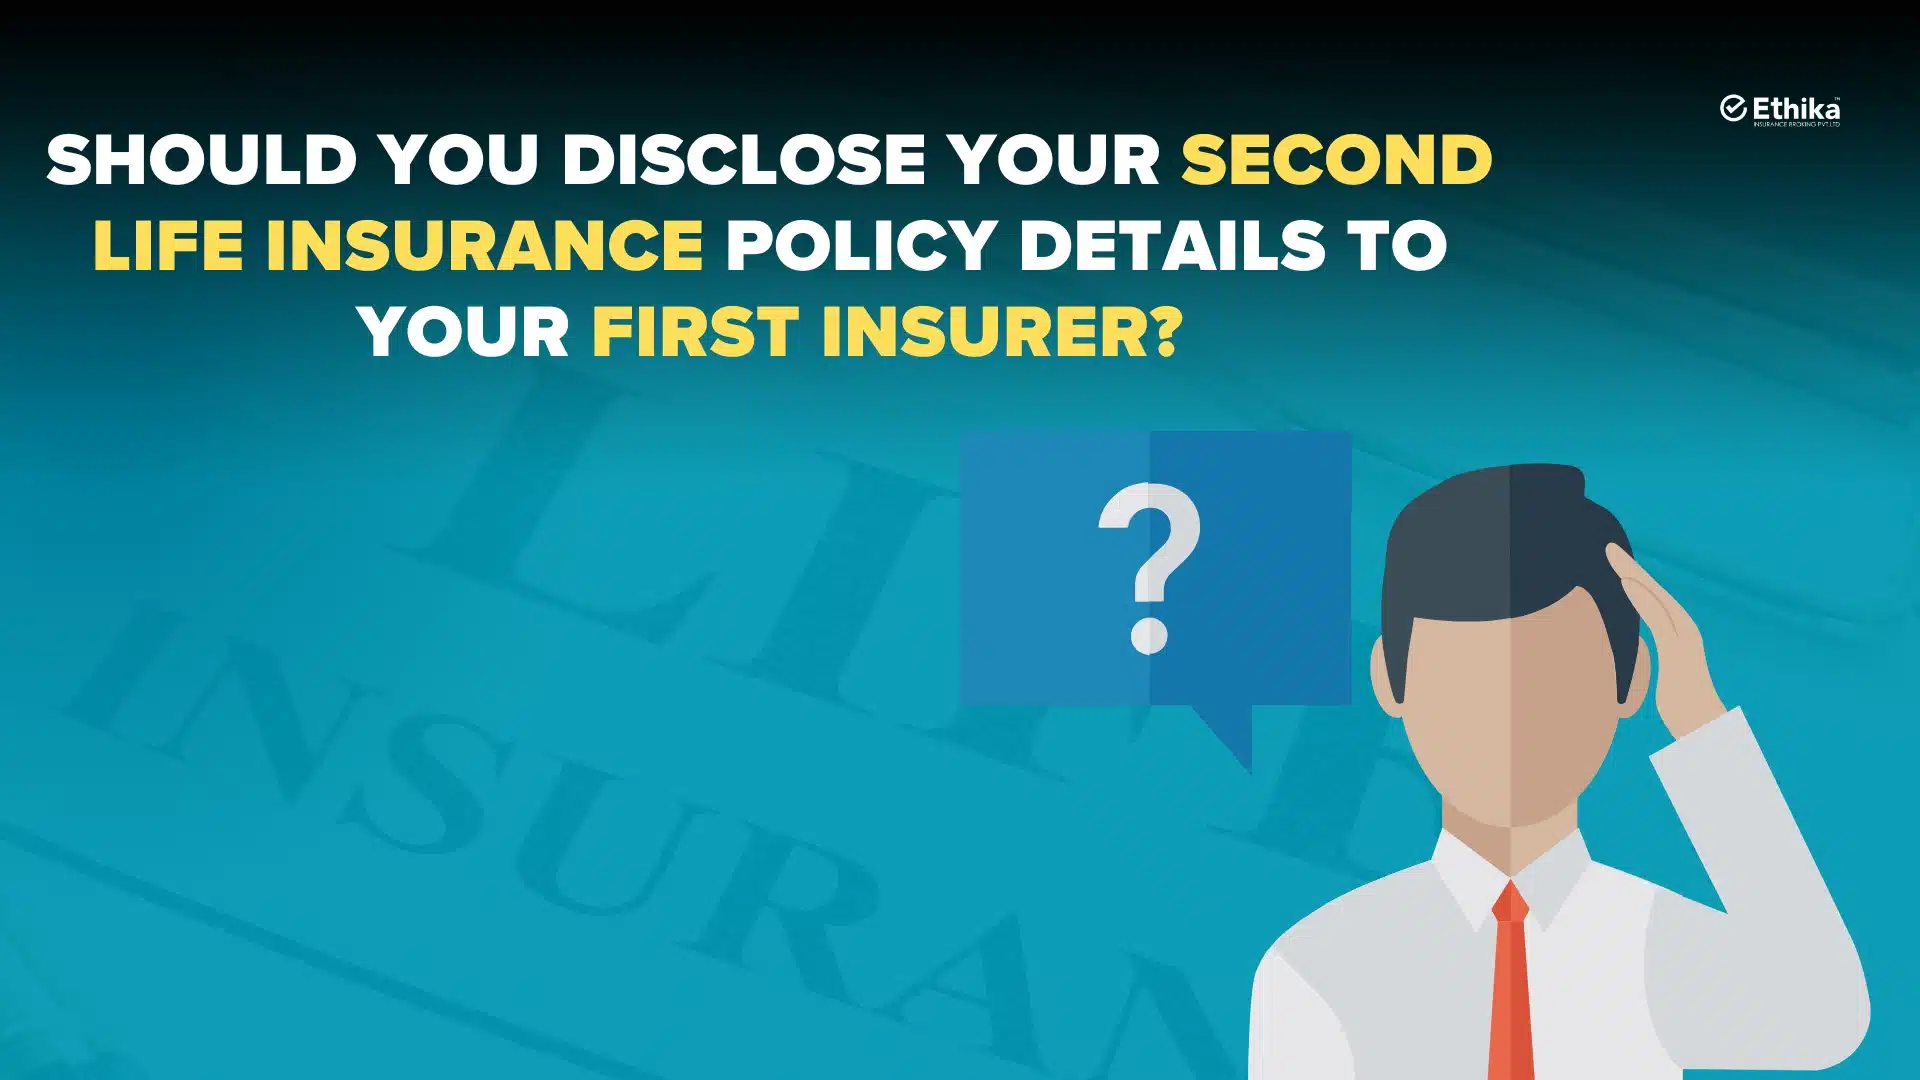 Should You Tell Your First Insurer About Your Second Life Insurance Policy?